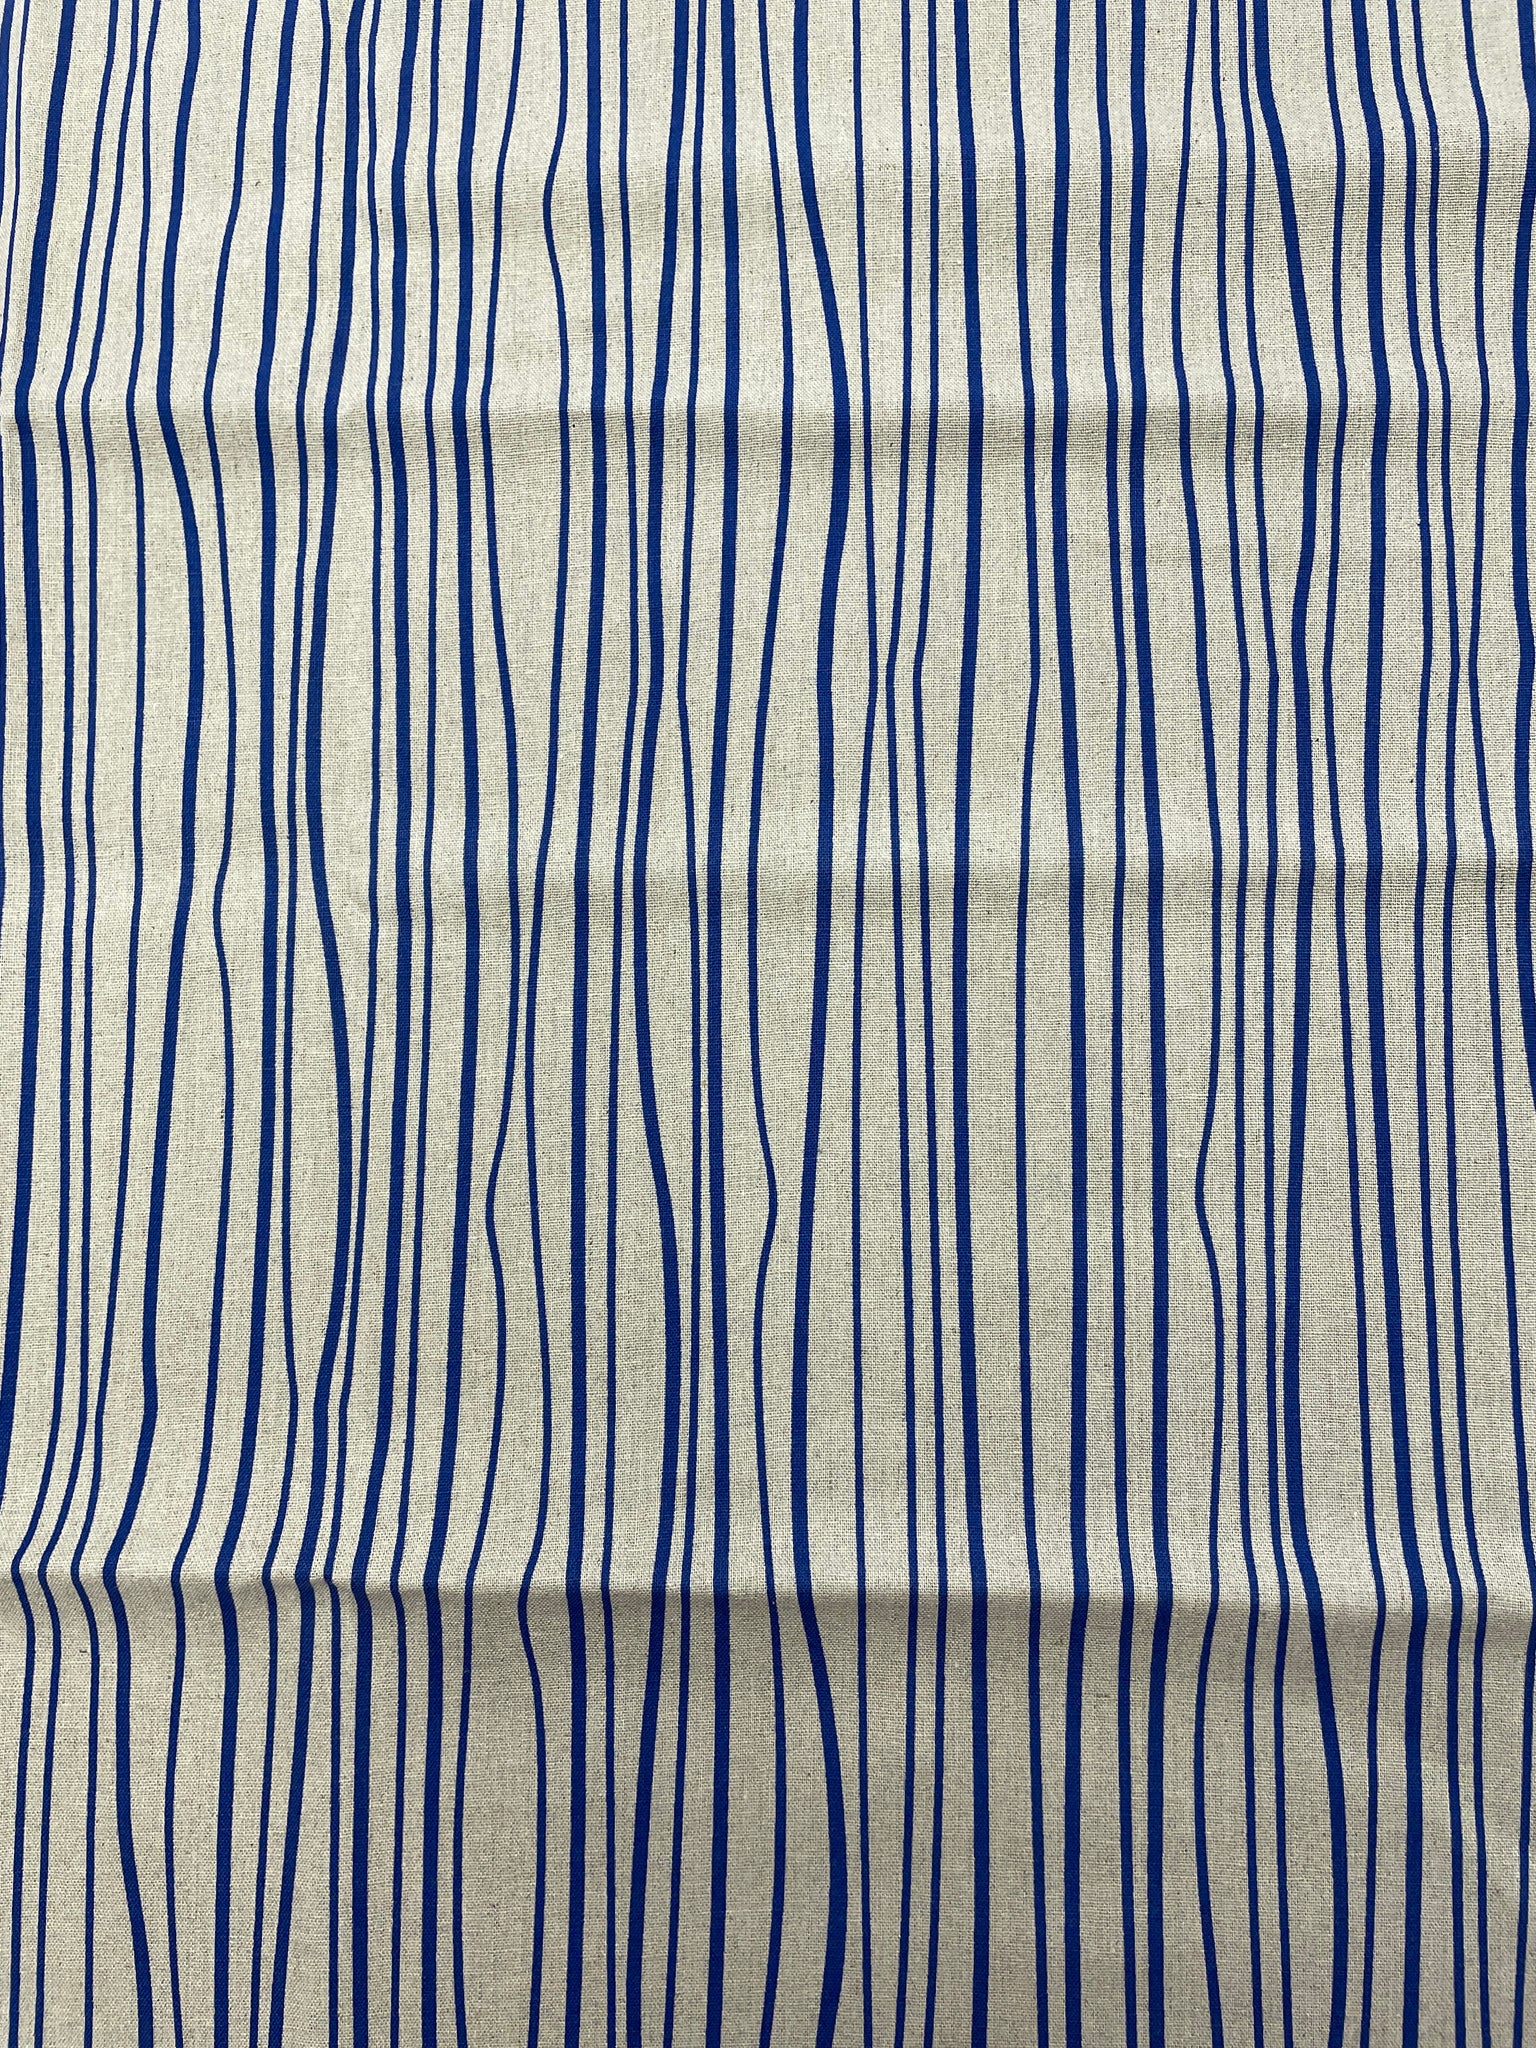 2017 1 YD Cotton - Light Gray with Blue "Freehand" Stripes